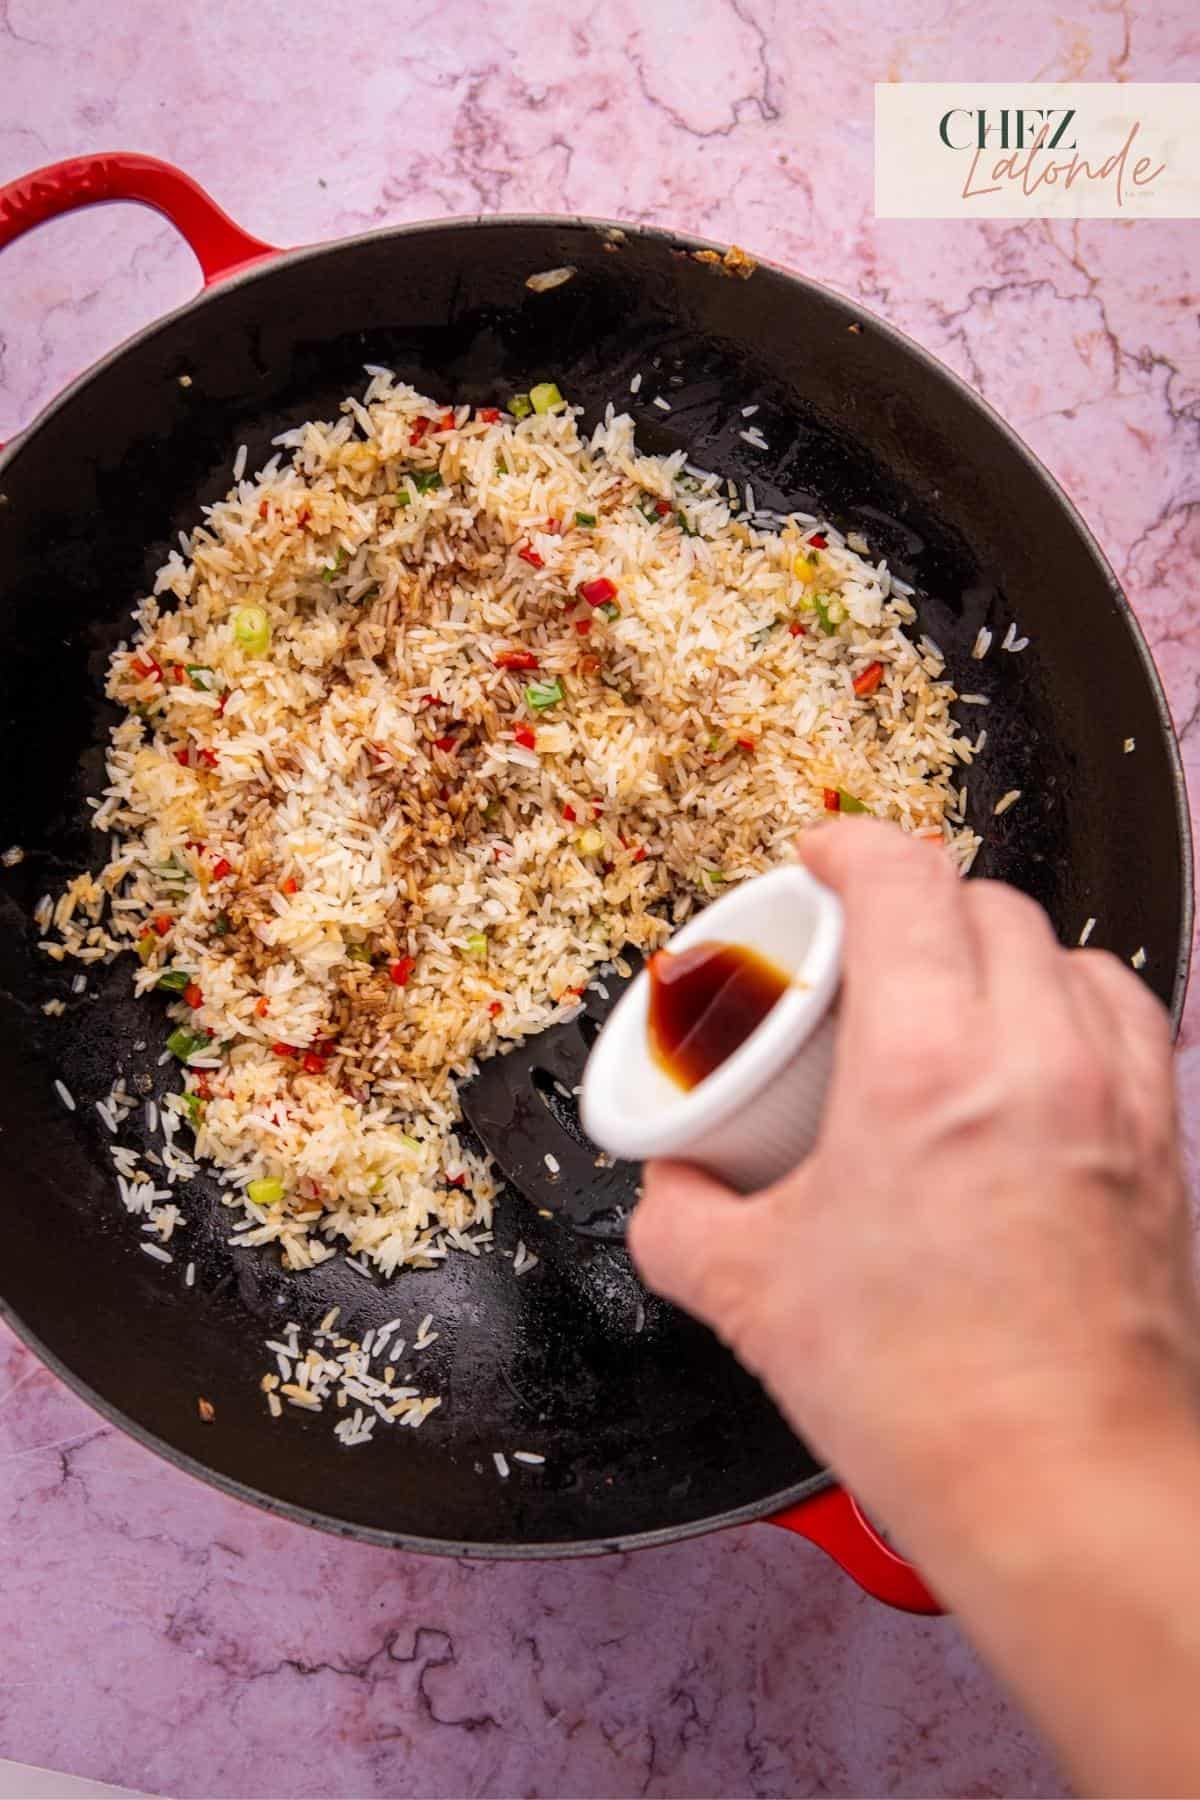 Add 3 tablespoons of regular soy sauce to the fried rice.